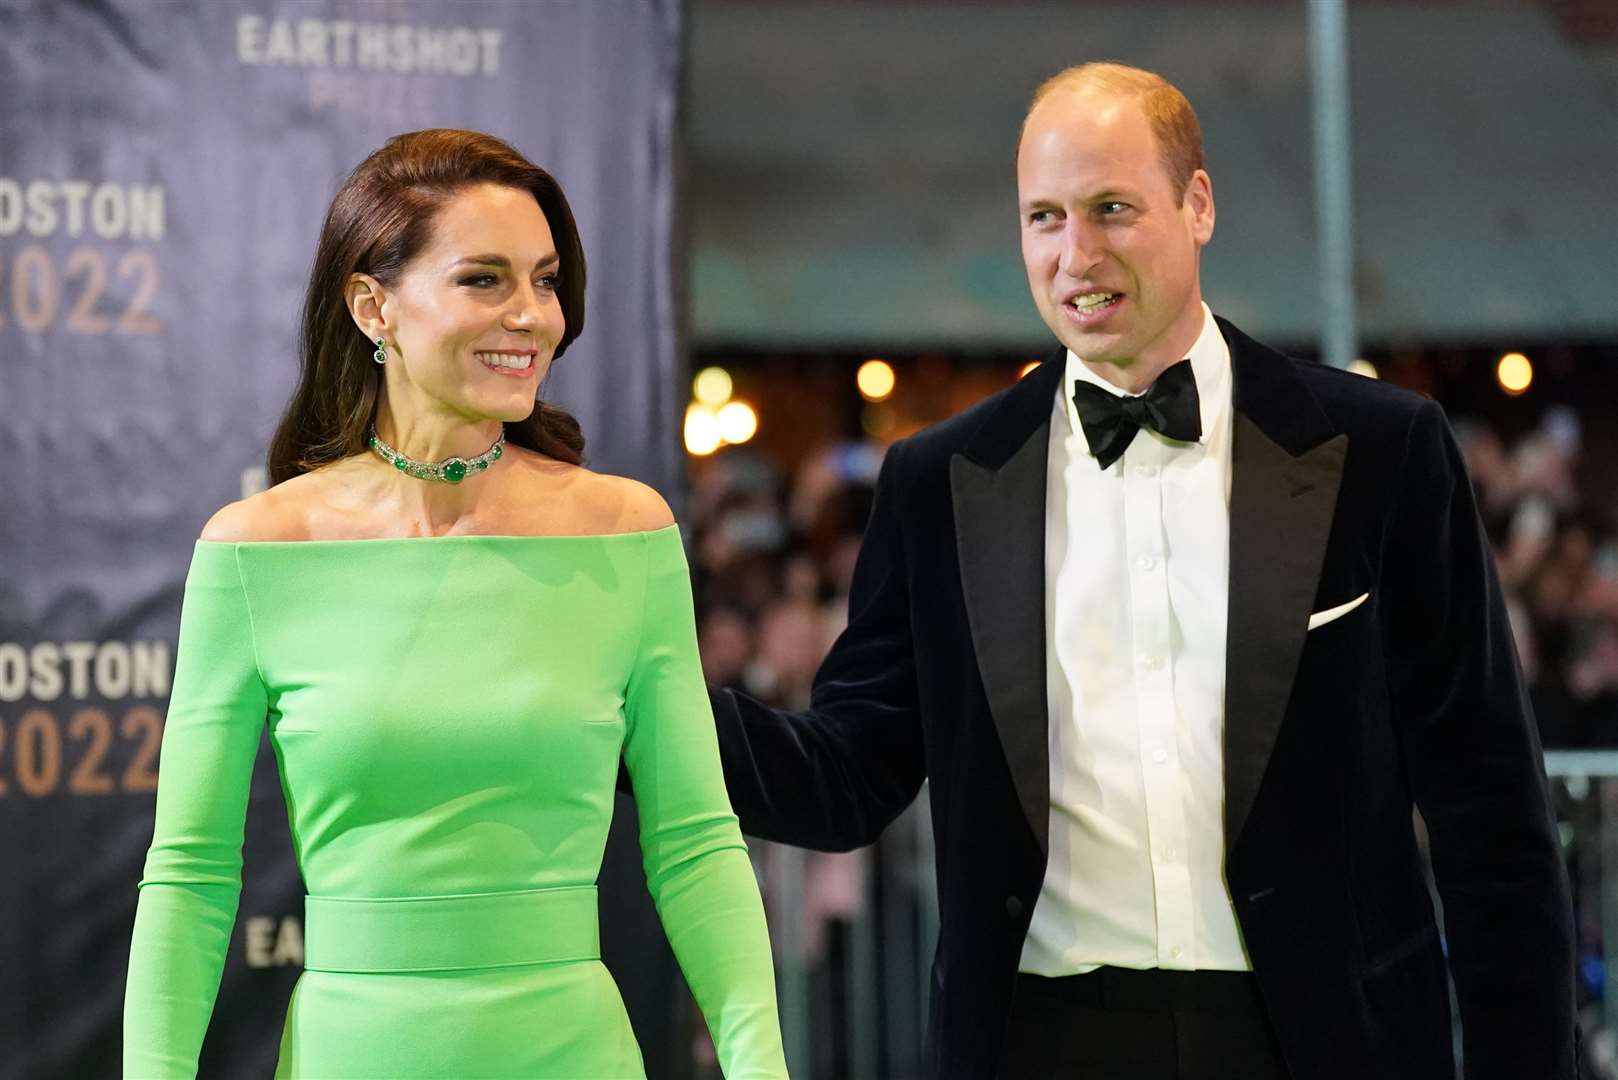 The Prince and Princess of Wales arrive for the second annual Earthshot Prize Awards Ceremony in Boston (Kirsty O’Connor/PA)